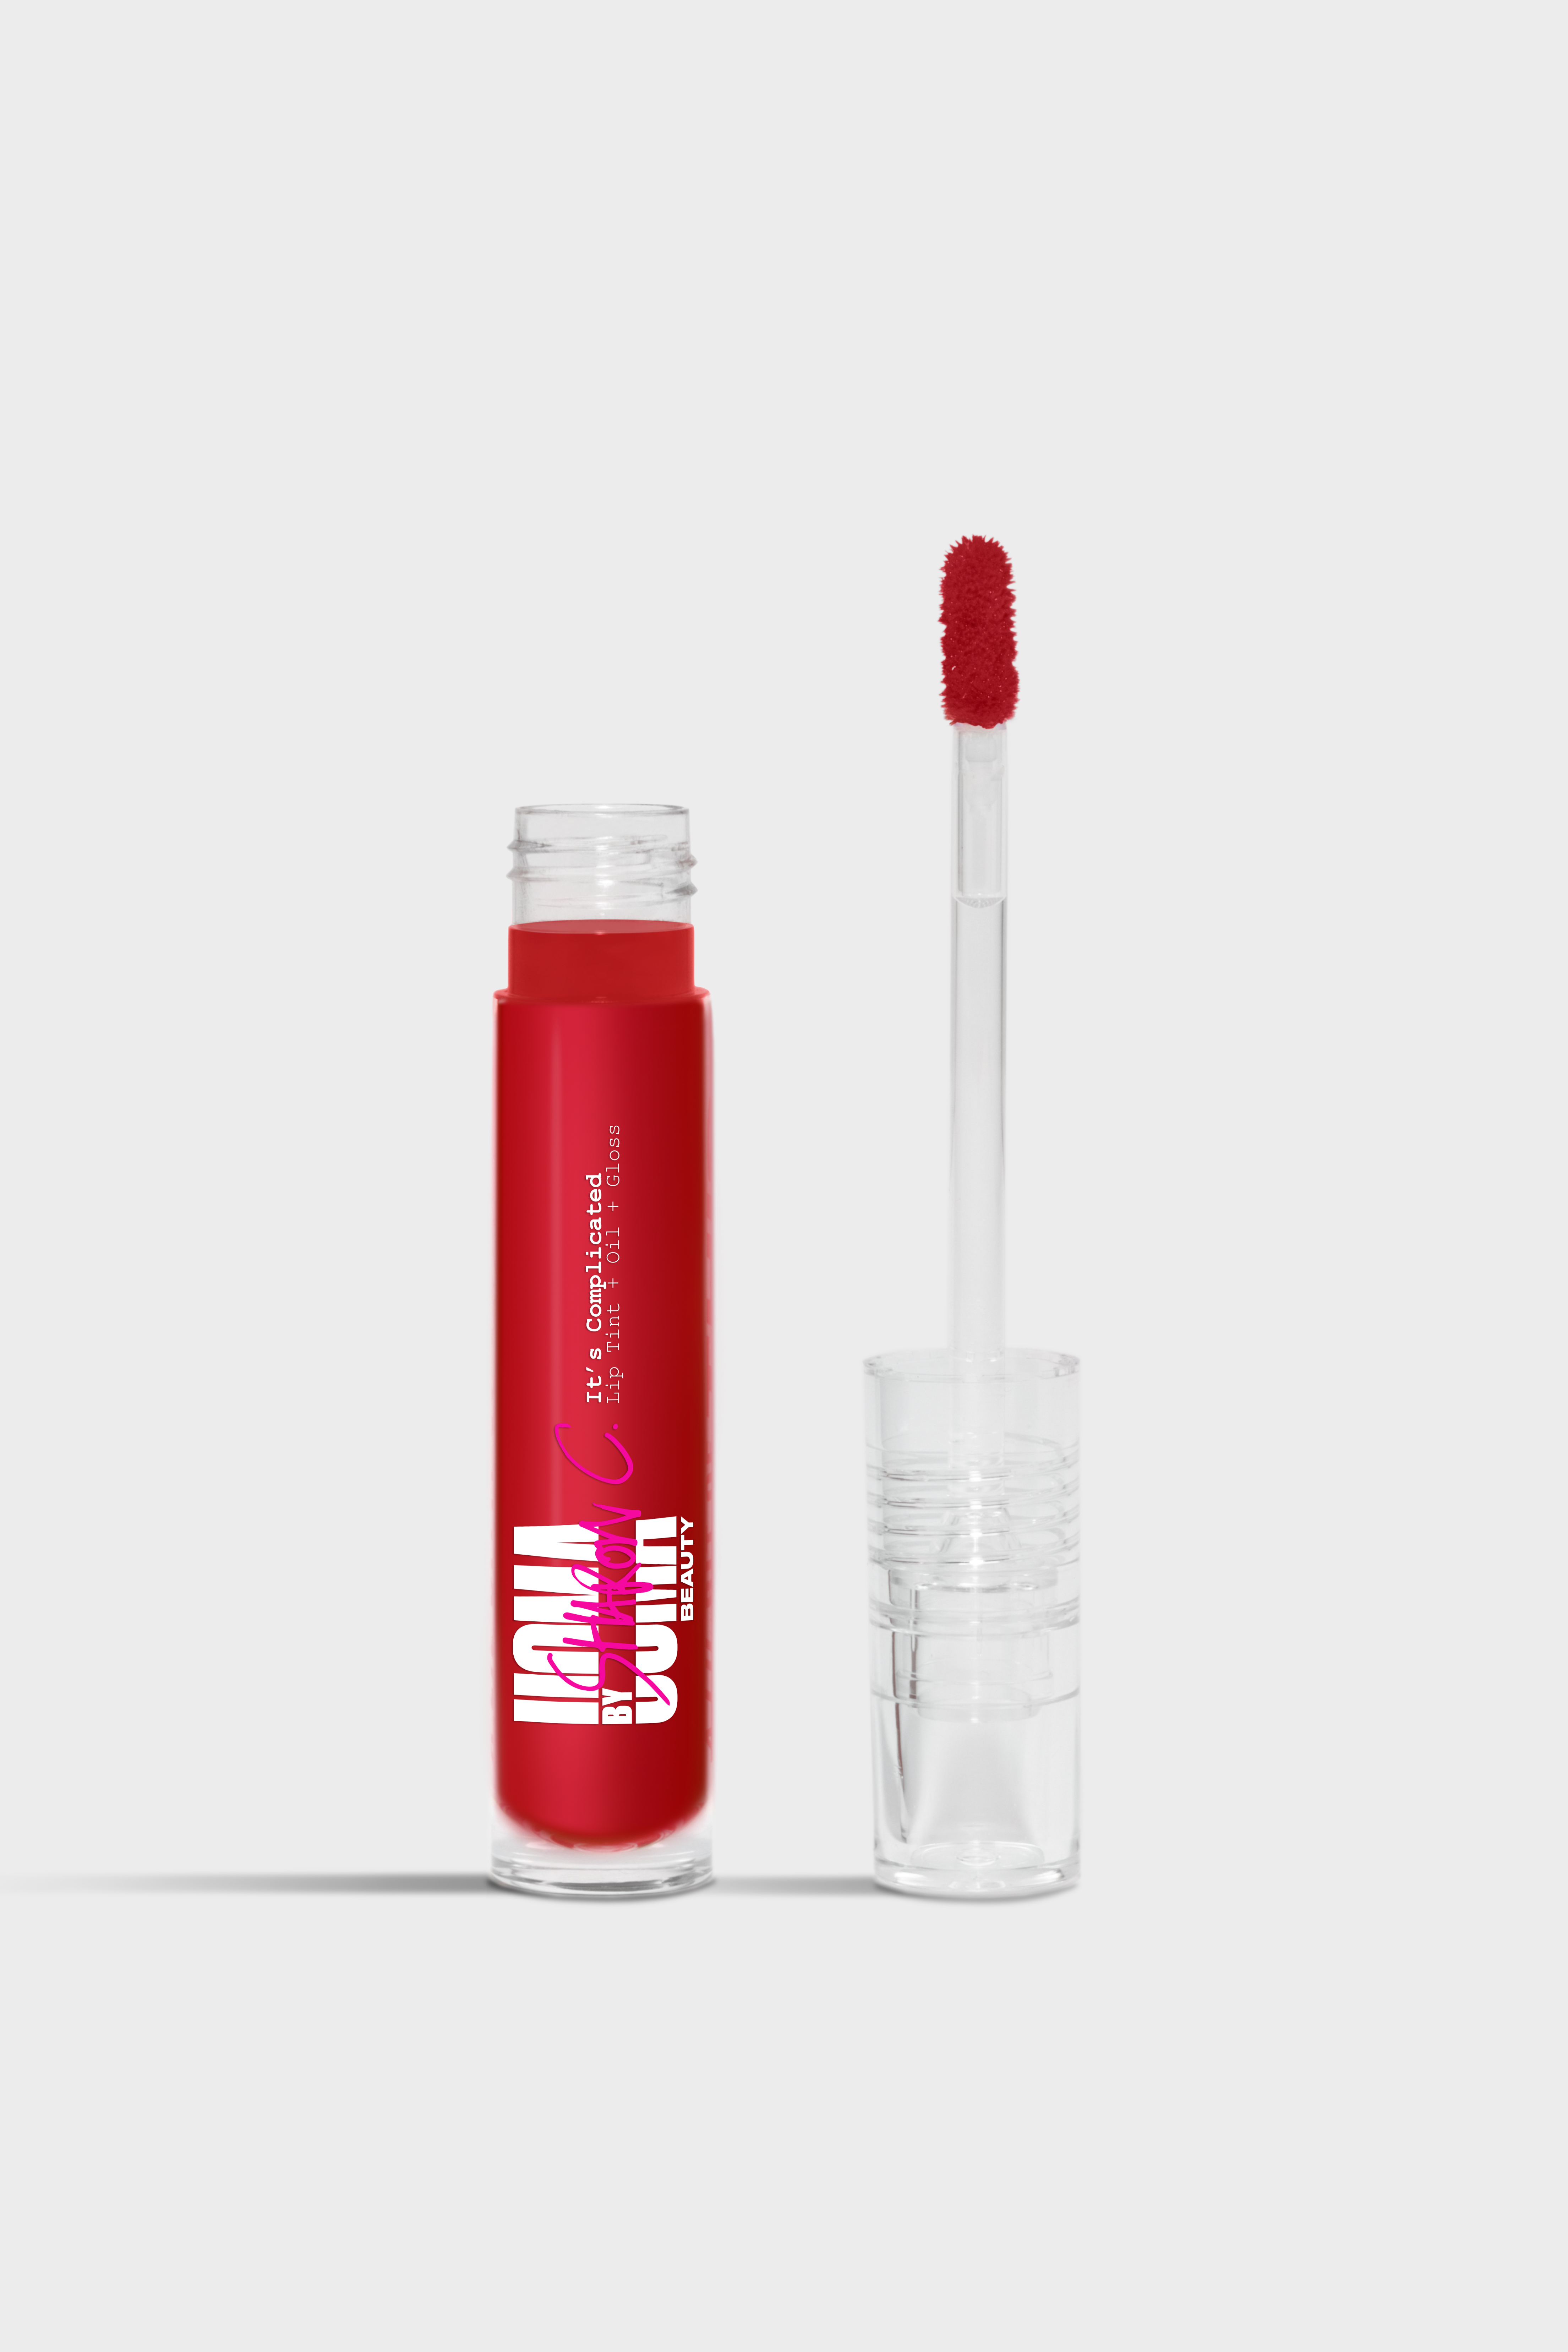 Uoma by Sharon C, It's Complicated Lip Tint + Oil + Gloss Boasty! - image 2 of 8